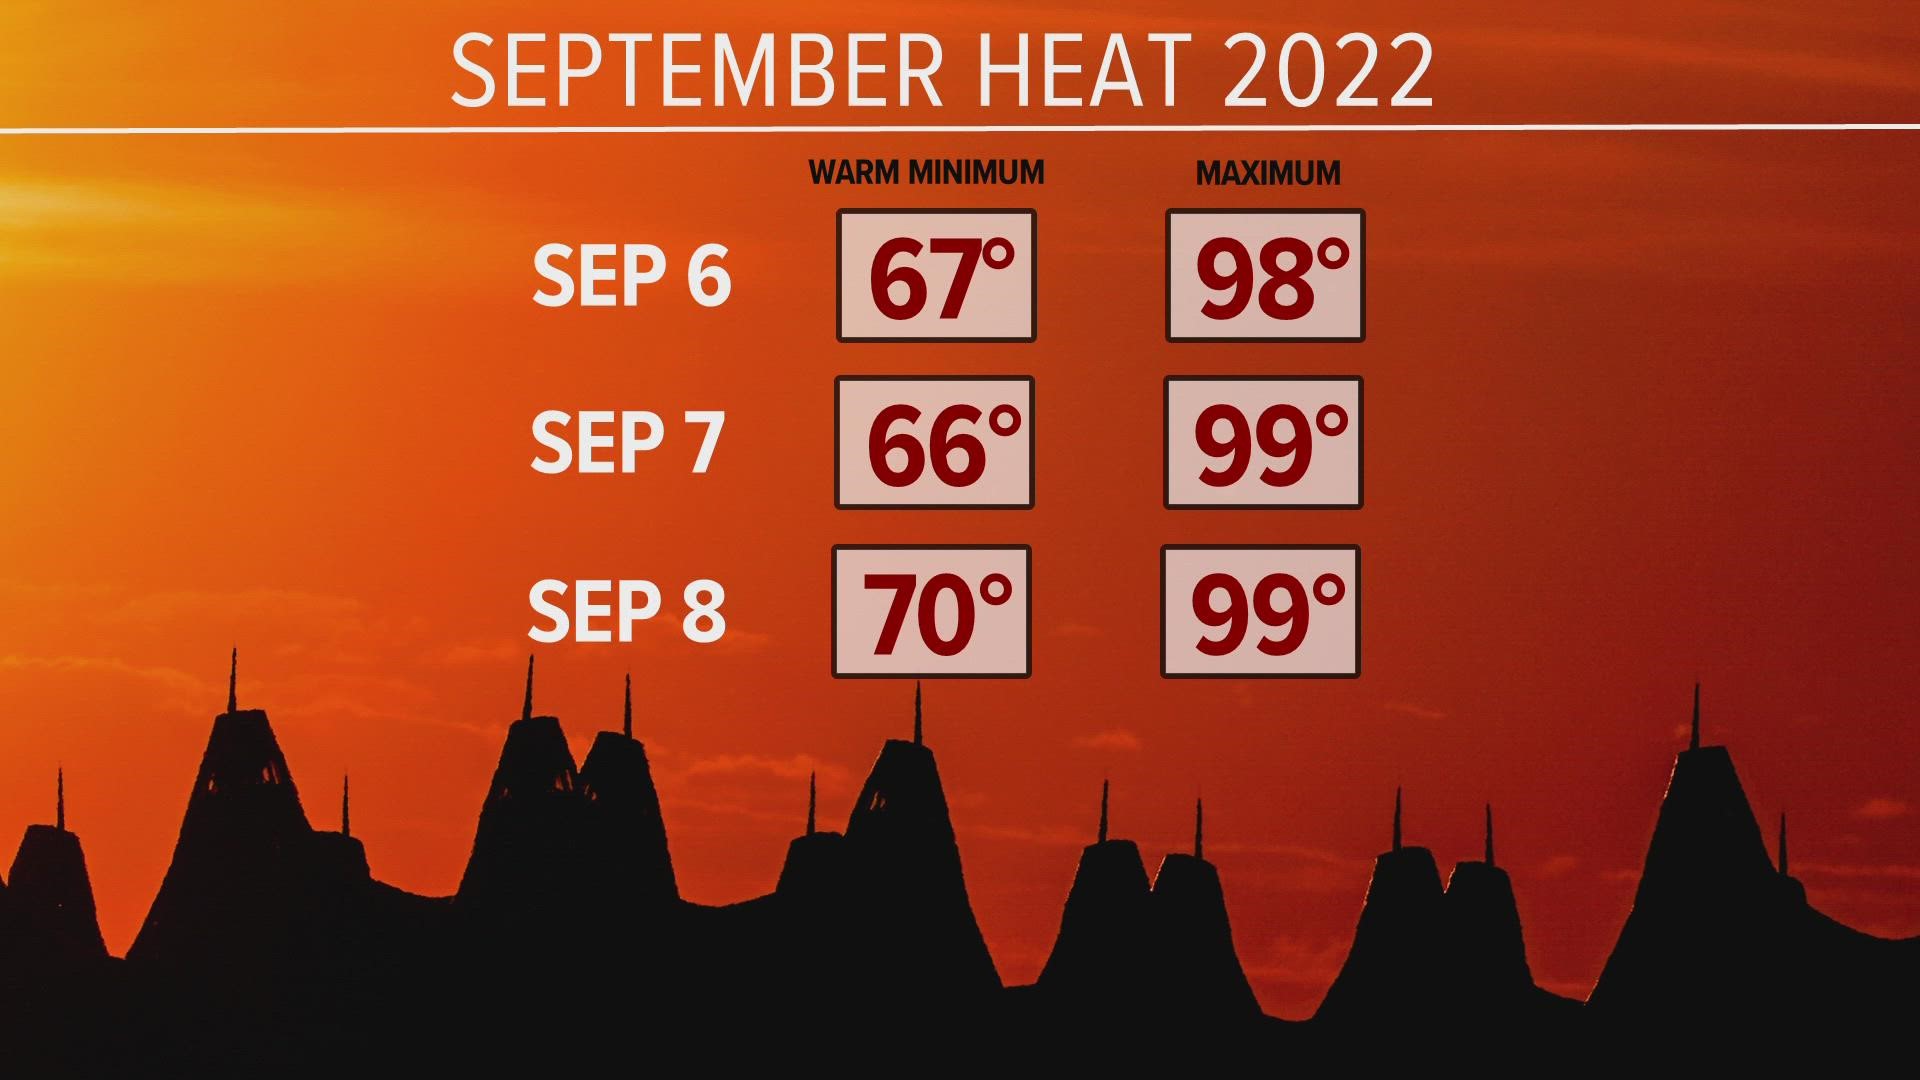 Denver has now broken at least one heat record in 7 consecutive months. That's the first time that has happened in this century.